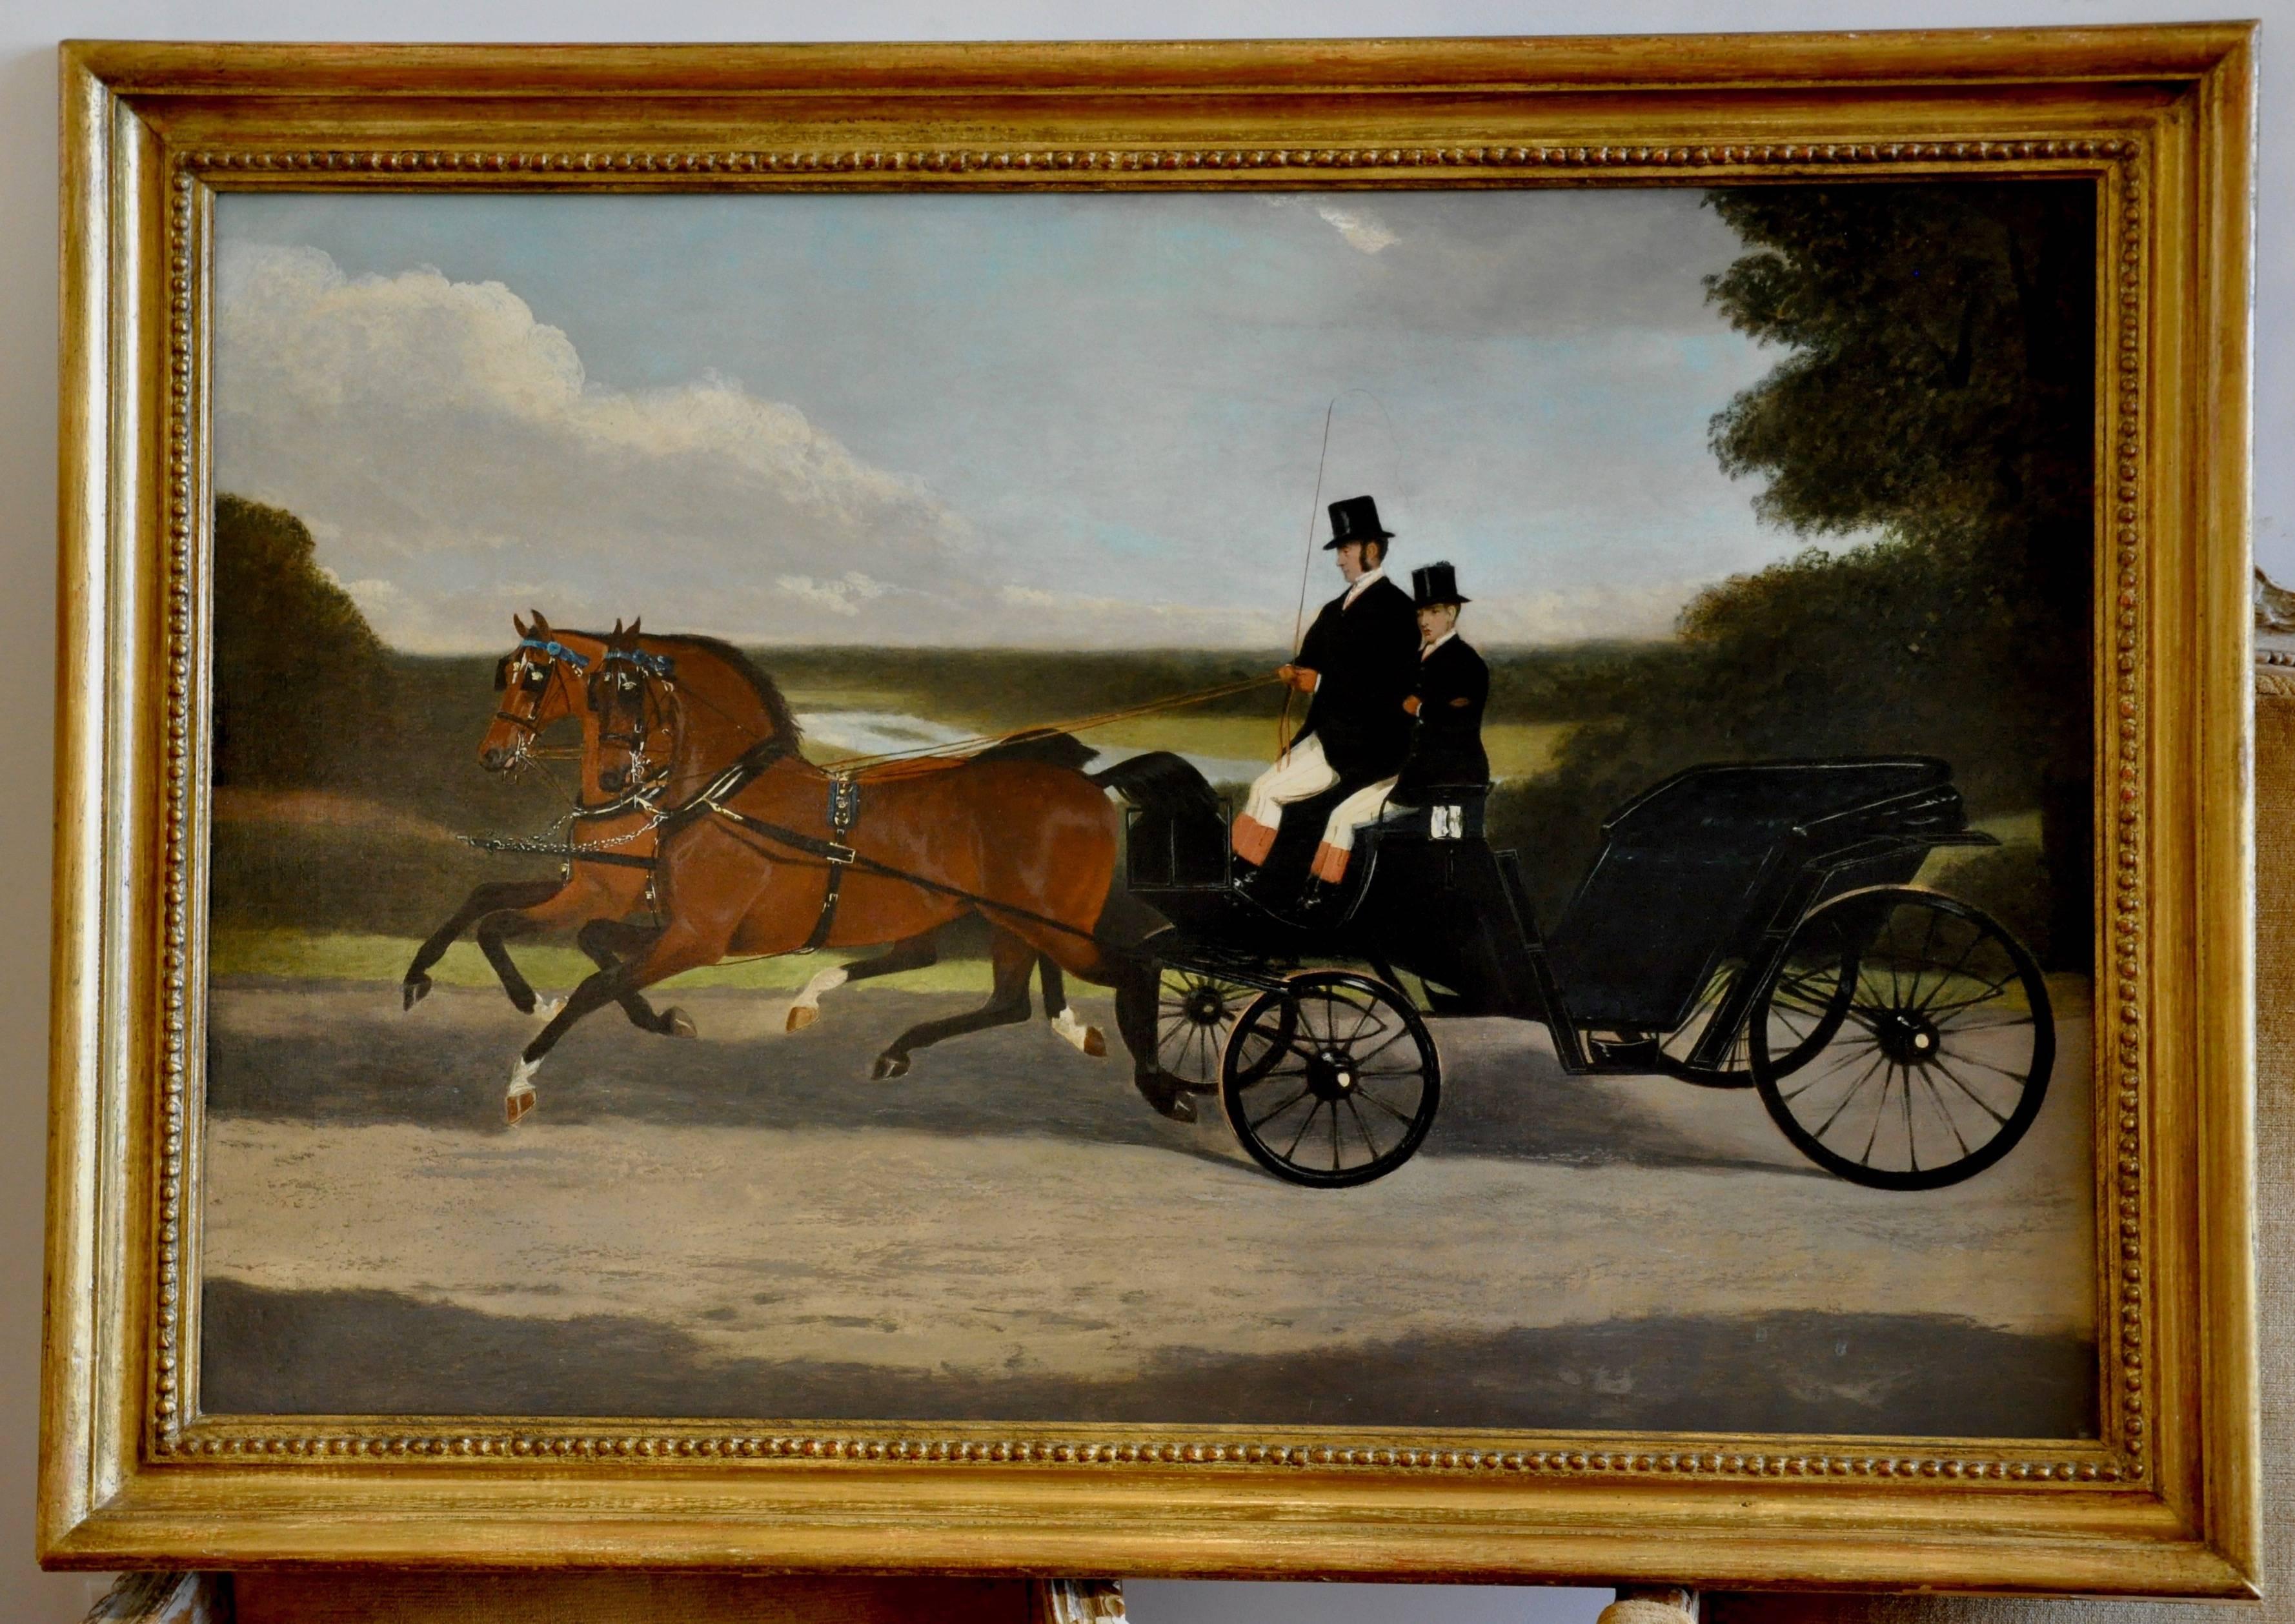 Pair of American or English, 19th century coaching scenes

--A true pair
--Equestrian and horse
--Were cleaned and relined. No visible signs of damage repair
--Original frames.
  